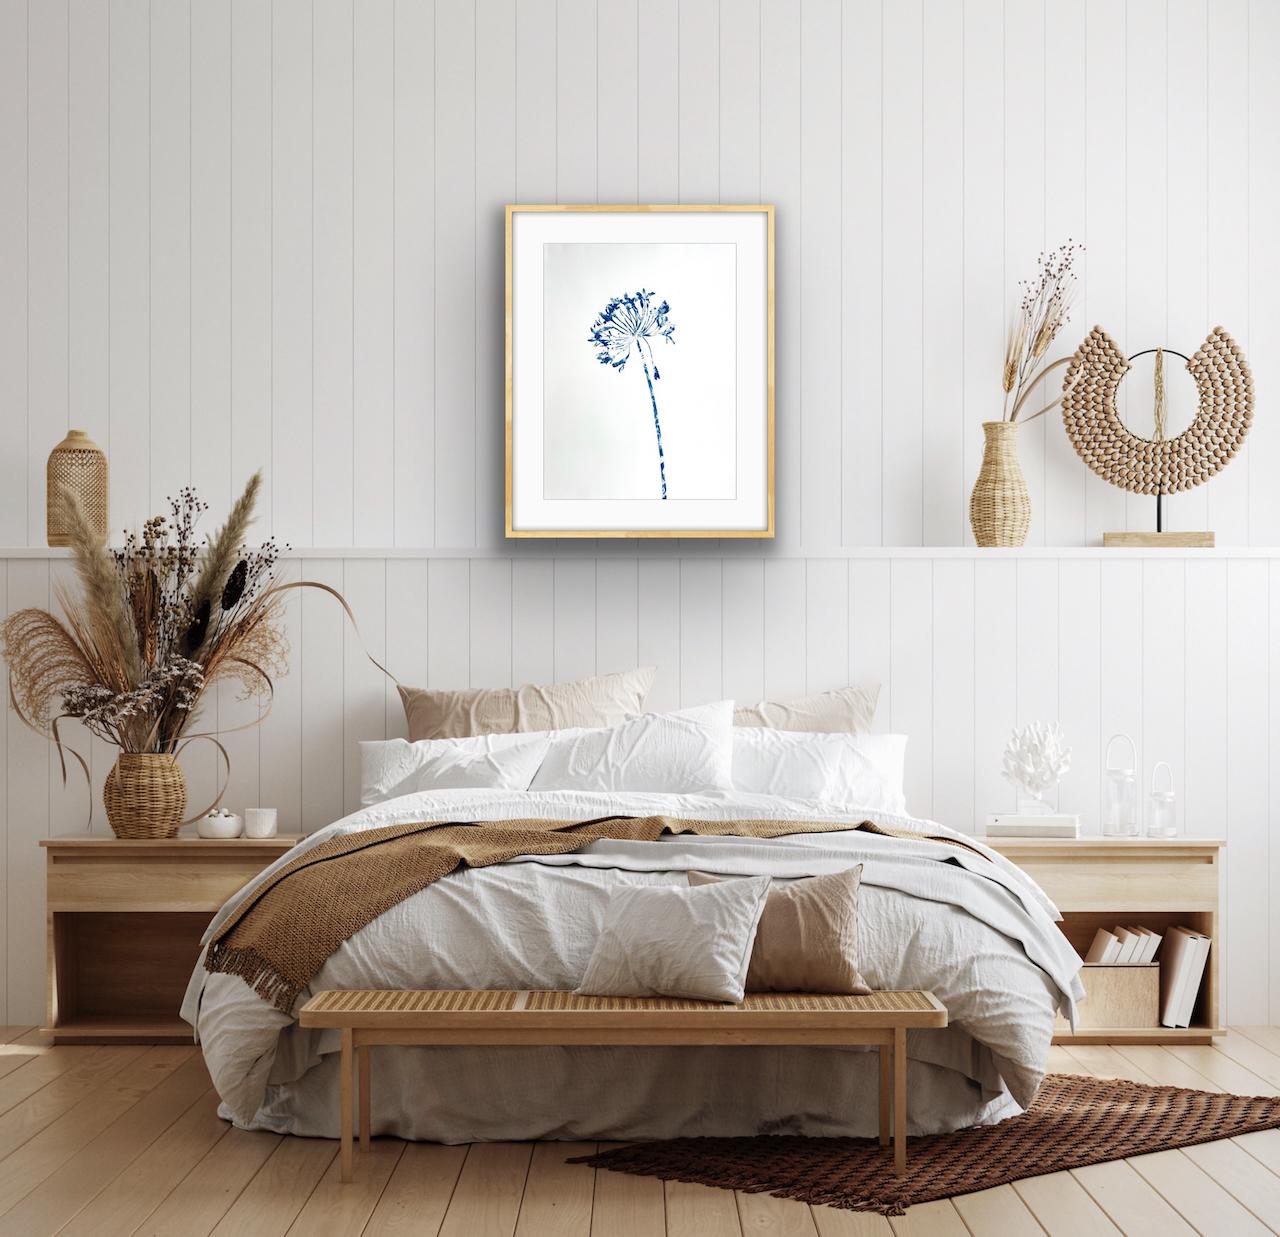 Delft Agapanthus 3 (Cyanotype Painting) For Sale 1